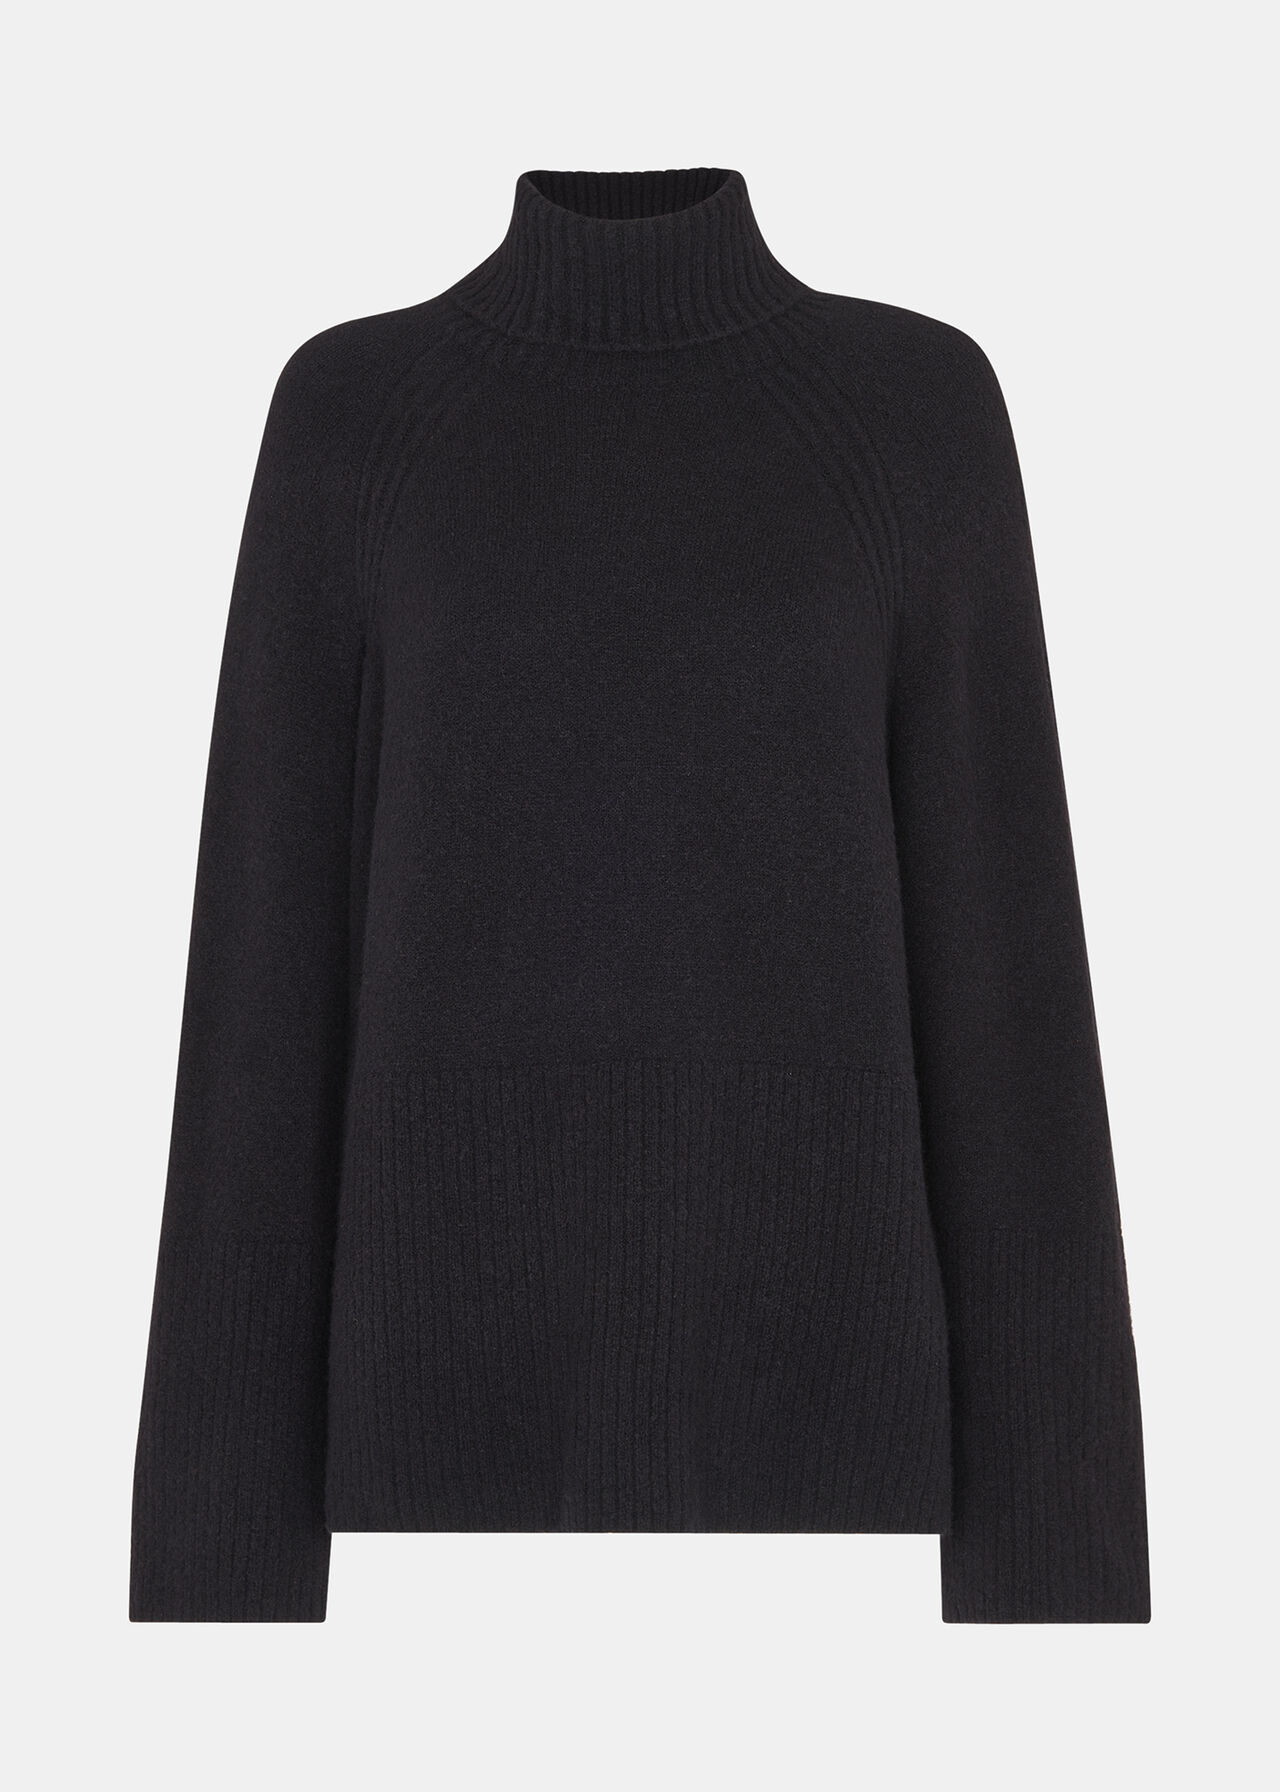 Shop the Black Ribbed Roll Neck Jumper at Whistles